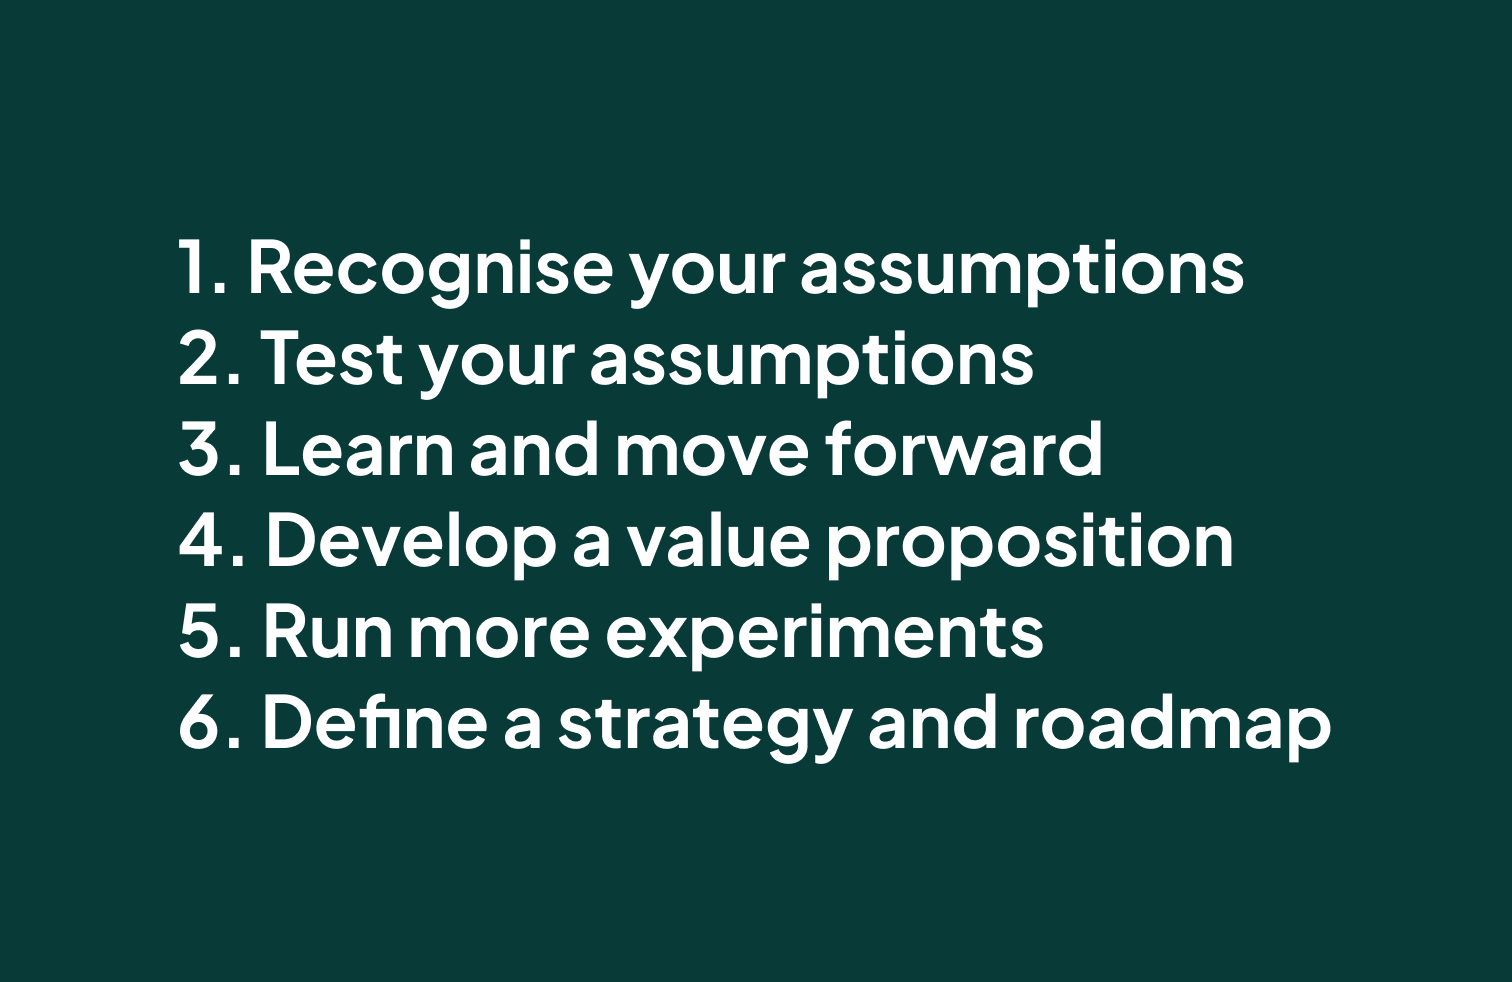 1. Recognise your assumptions
2. Test your assumptions
3. Learn and move forward
4. Develop a value proposition
5. Run more experiments
6. Define a strategy and roadmap